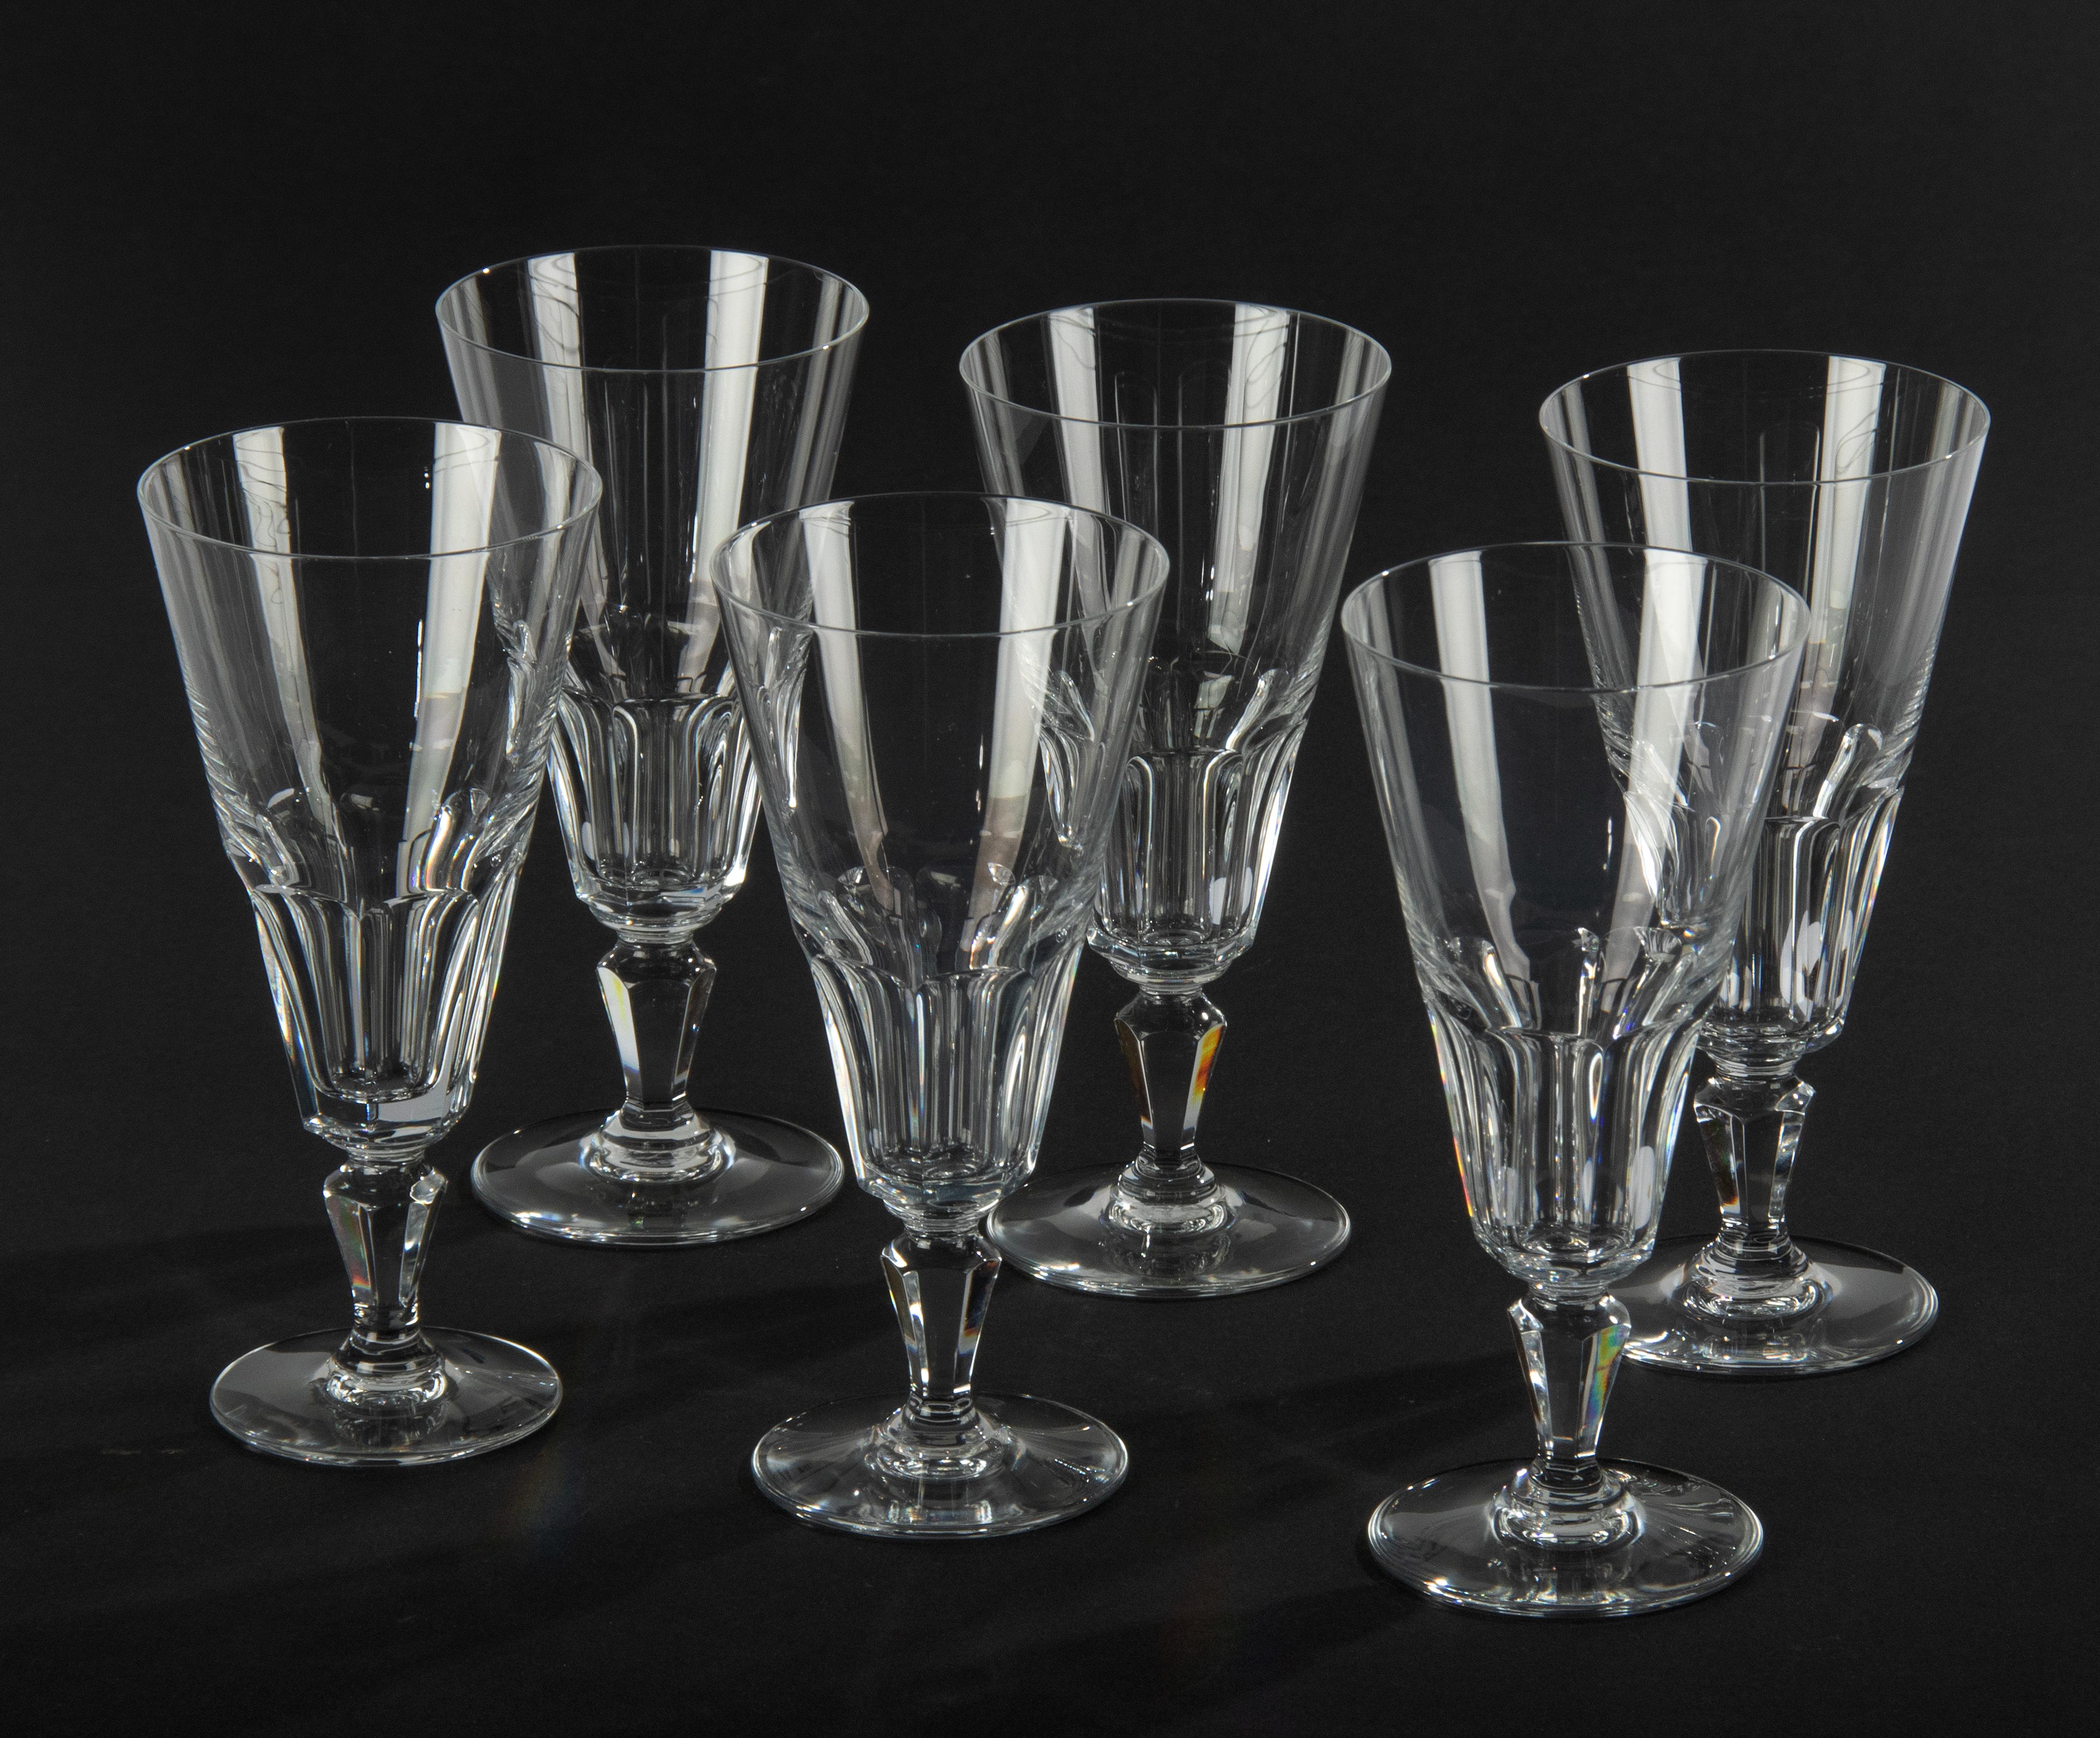 Nice set of 6 crystal champagne glasses, made by the French brand Baccarat. It is a classic model, timeless design. Produced around 1960-1970. In very good condition. All glasses are marked on the bottom.